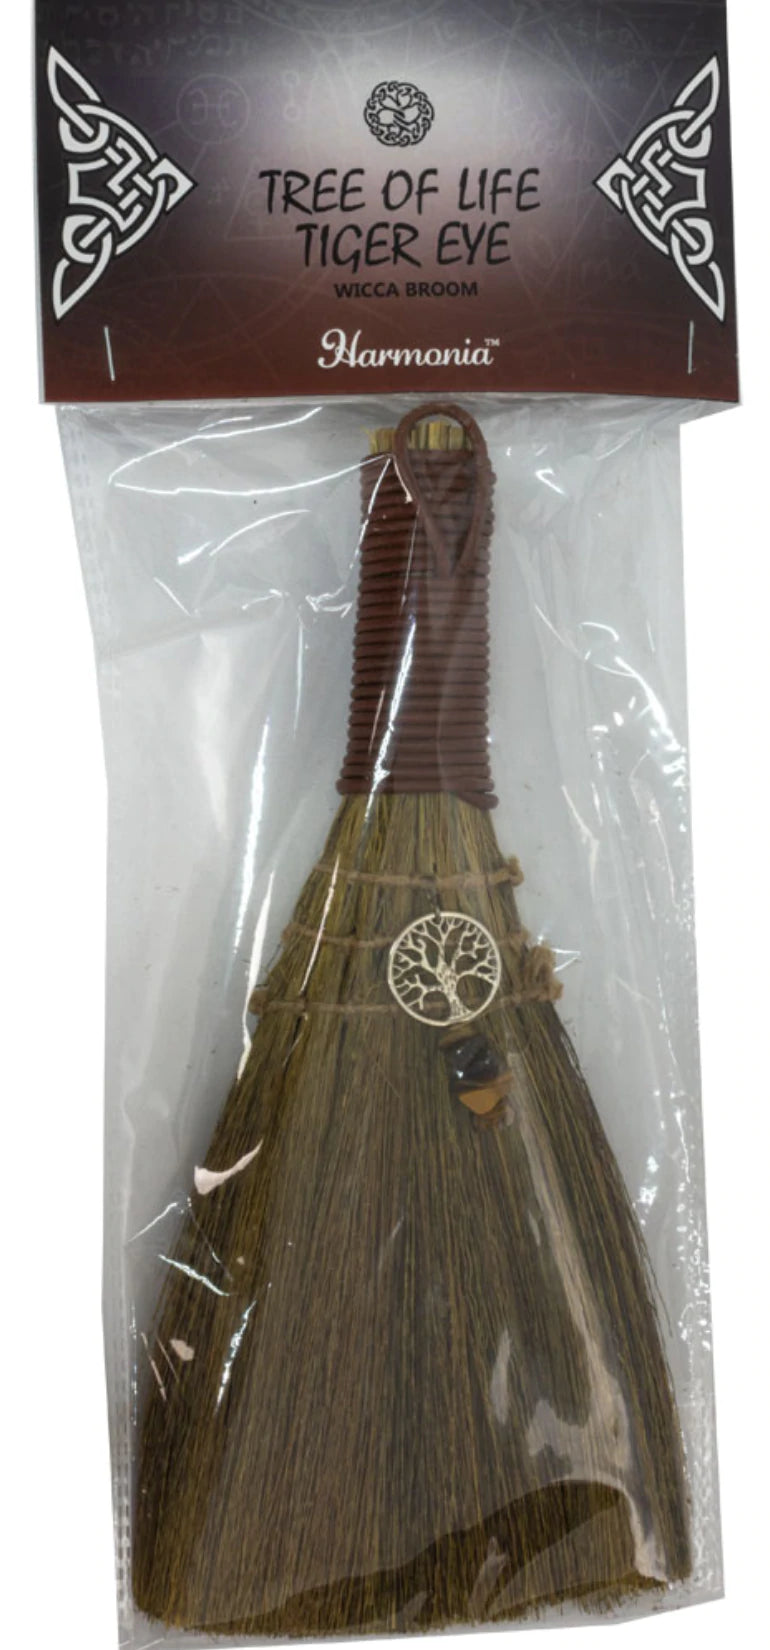 Wicca Cleanse Broom Tree of Life with Tiger Eye Harmonia Altar 20cm